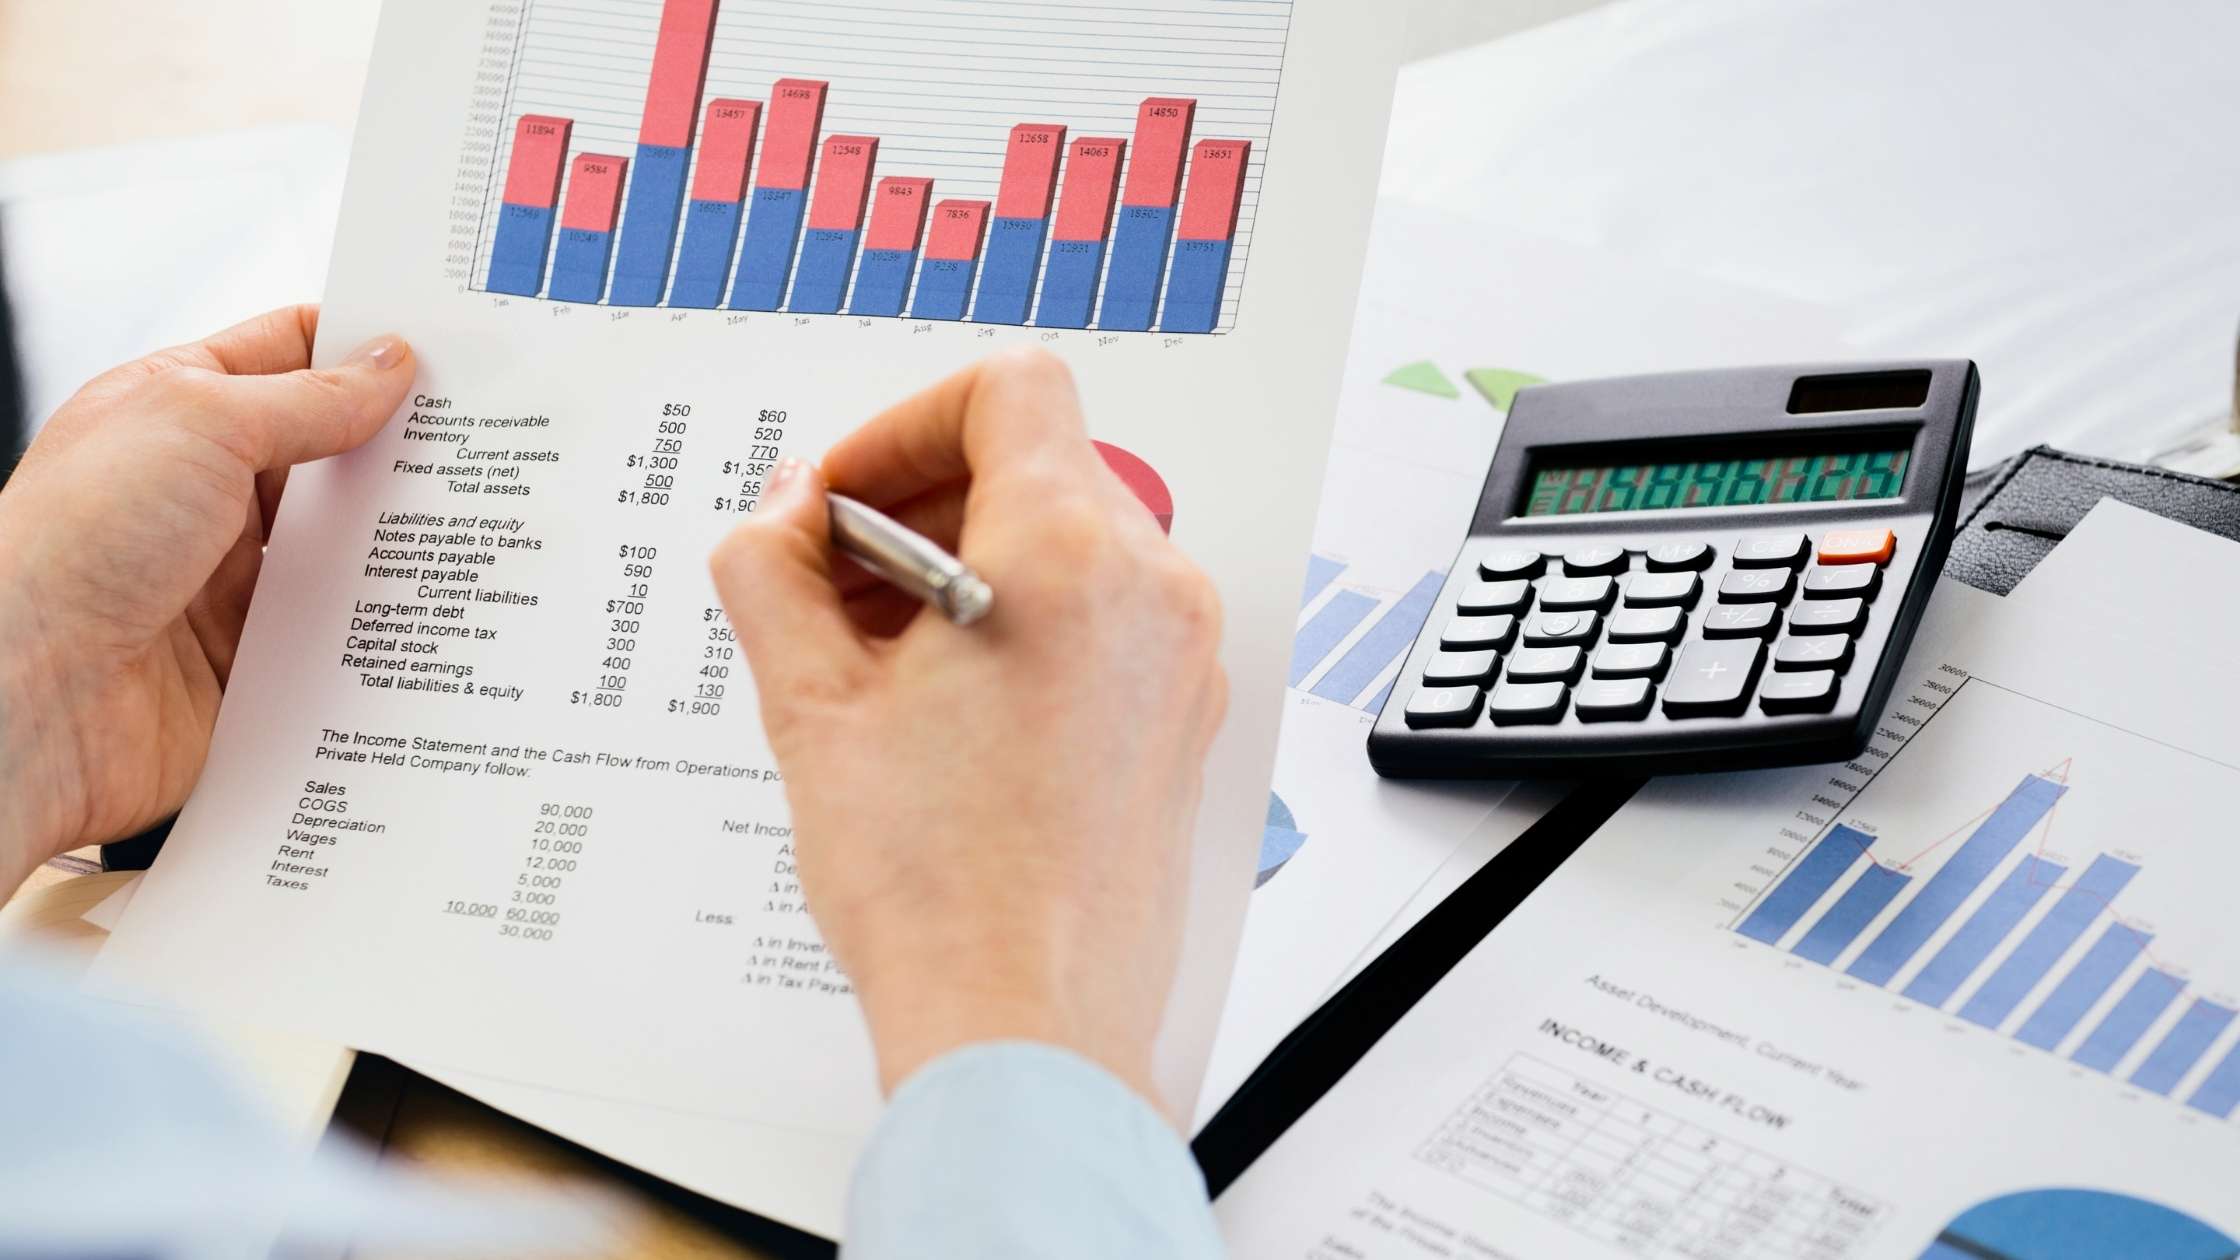 Why is bookkeeping important for small businesses?